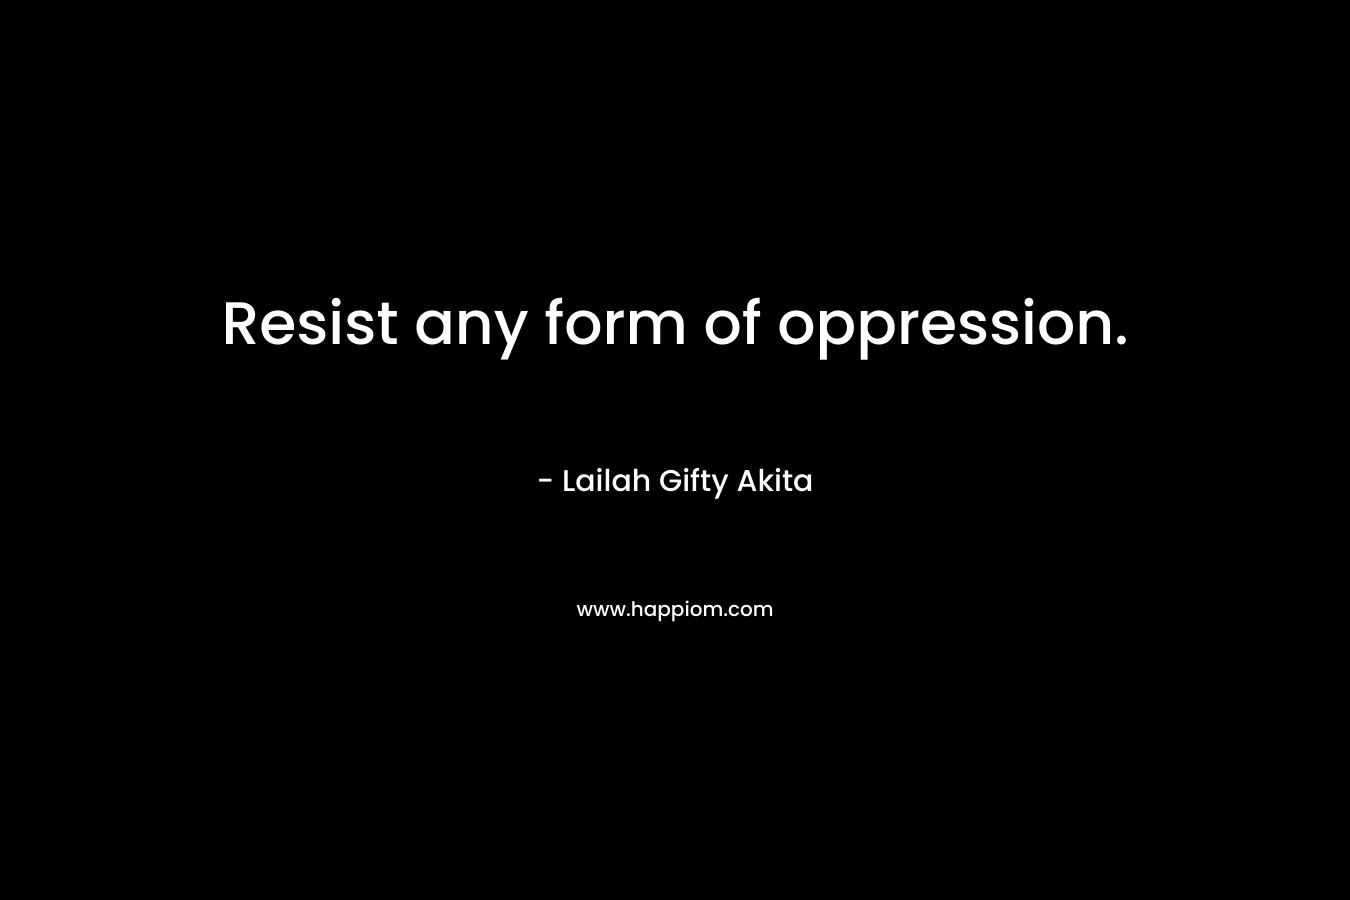 Resist any form of oppression.